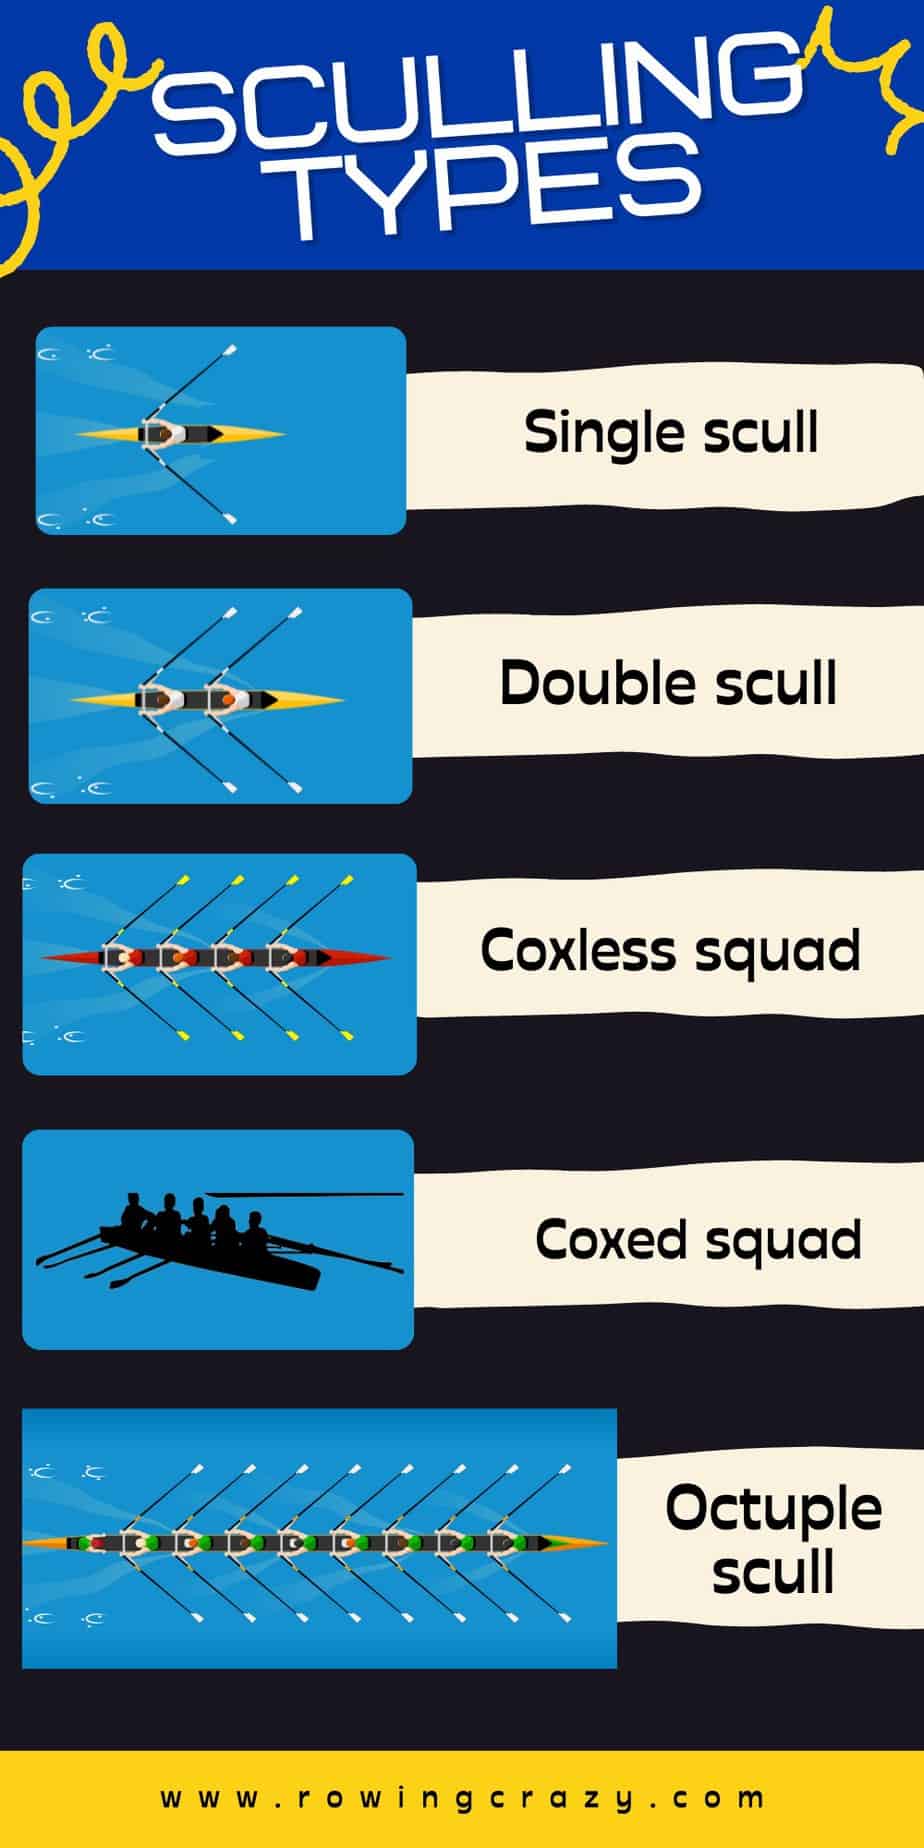 Sculling types - what is a sculling boat called